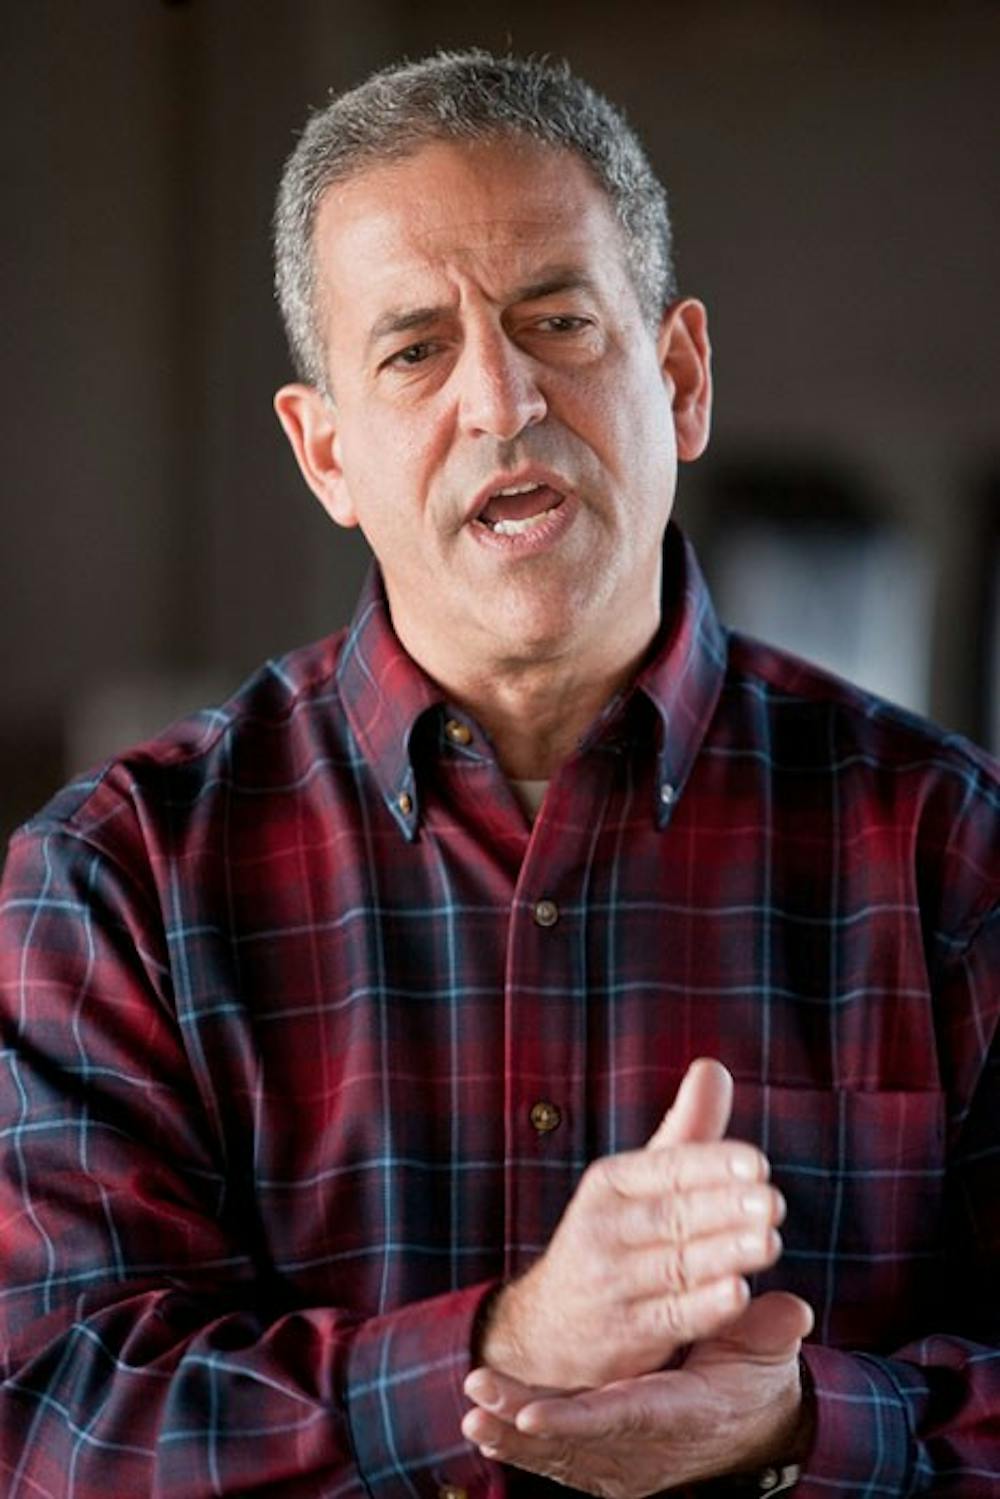 Feingold's experience trumps Johnson's wallet